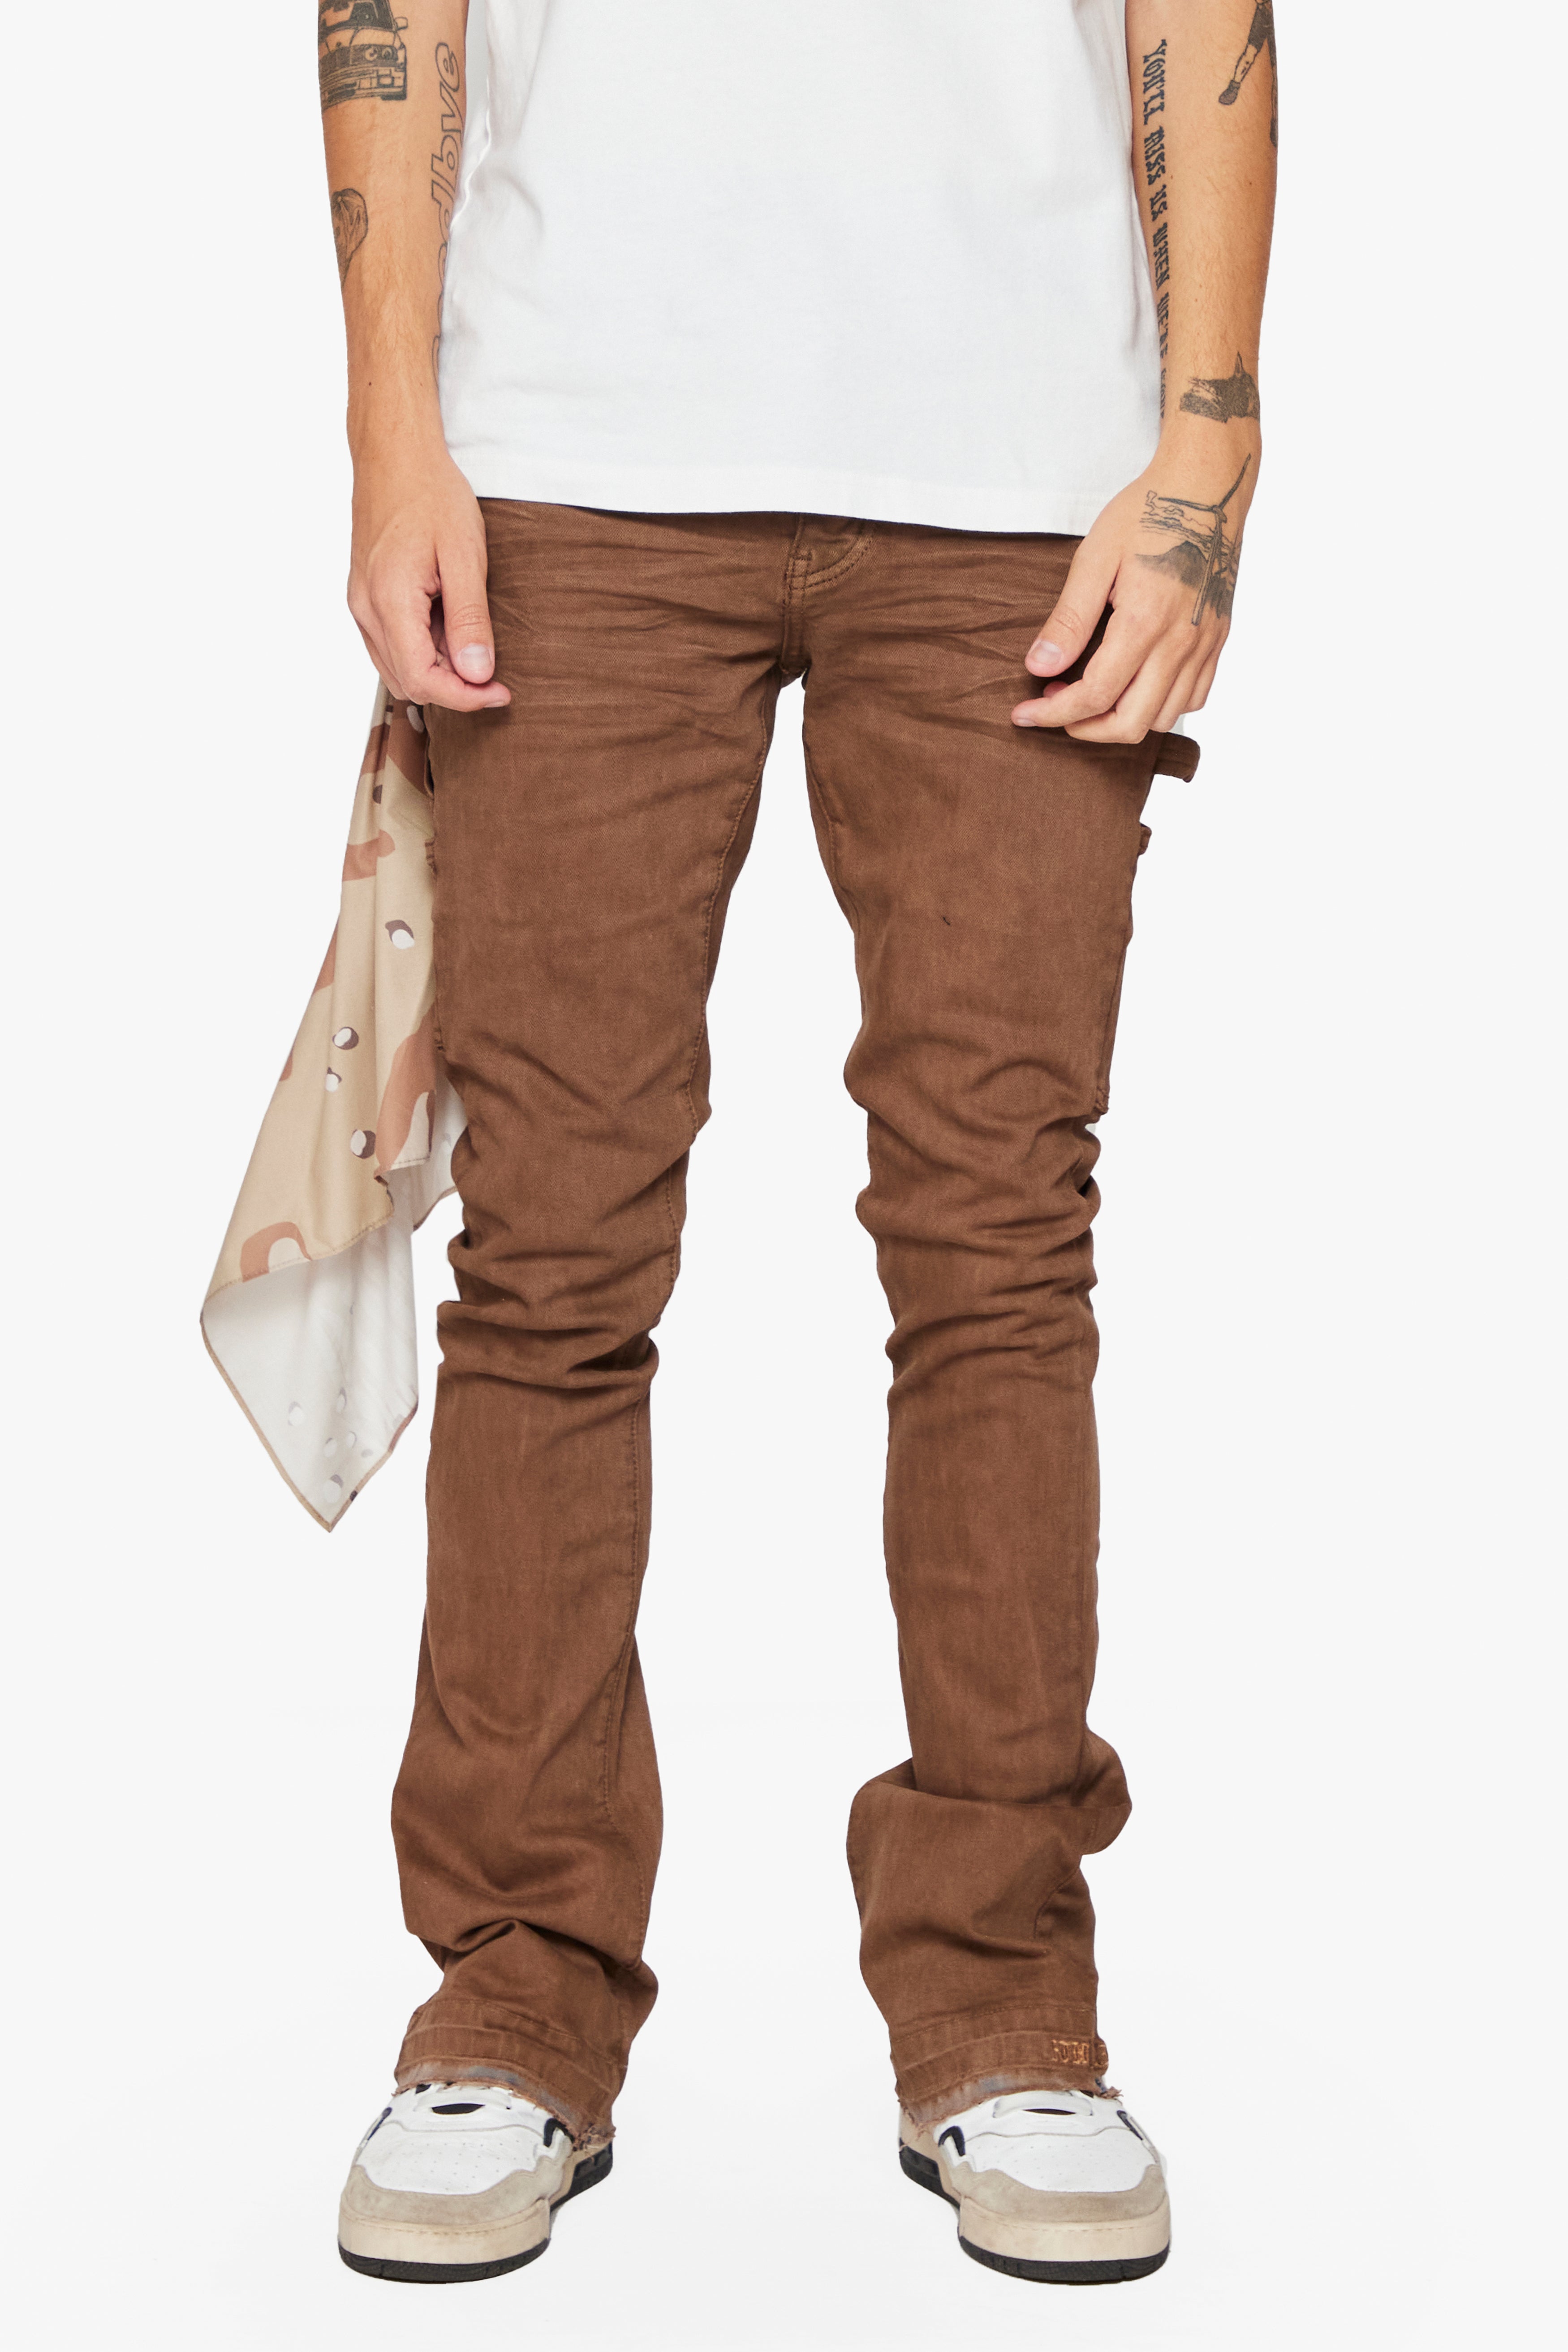 6thNBRHD SUPER STACKED "TRADITION" -BROWN